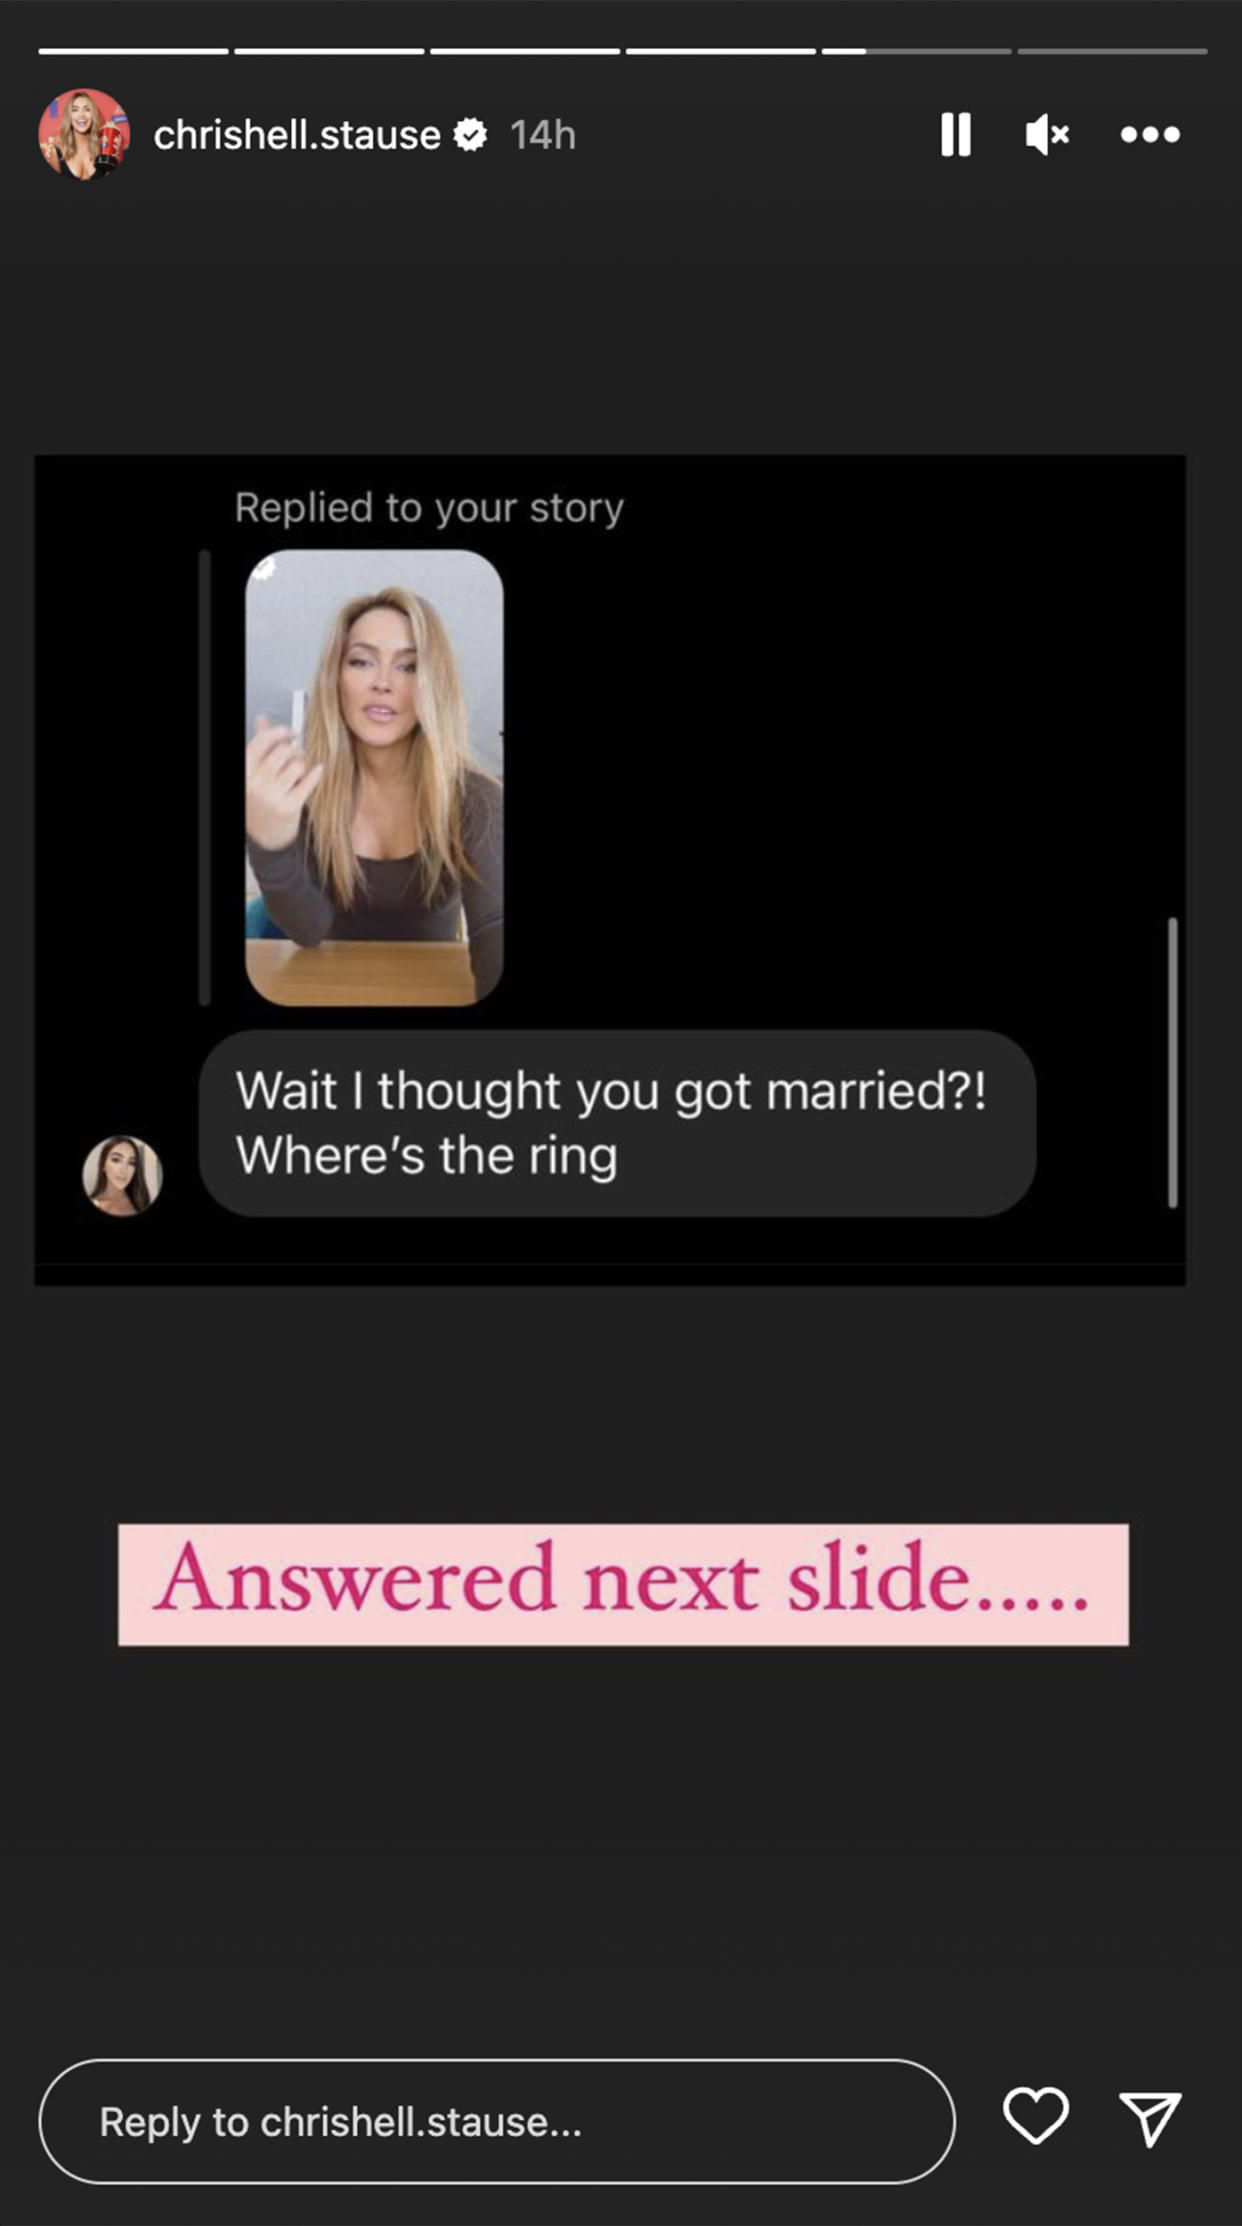 A fan asks Chrishell Stause why she's not wearing her wedding ring on Instagram. (@chrishell.stause via Instagram)